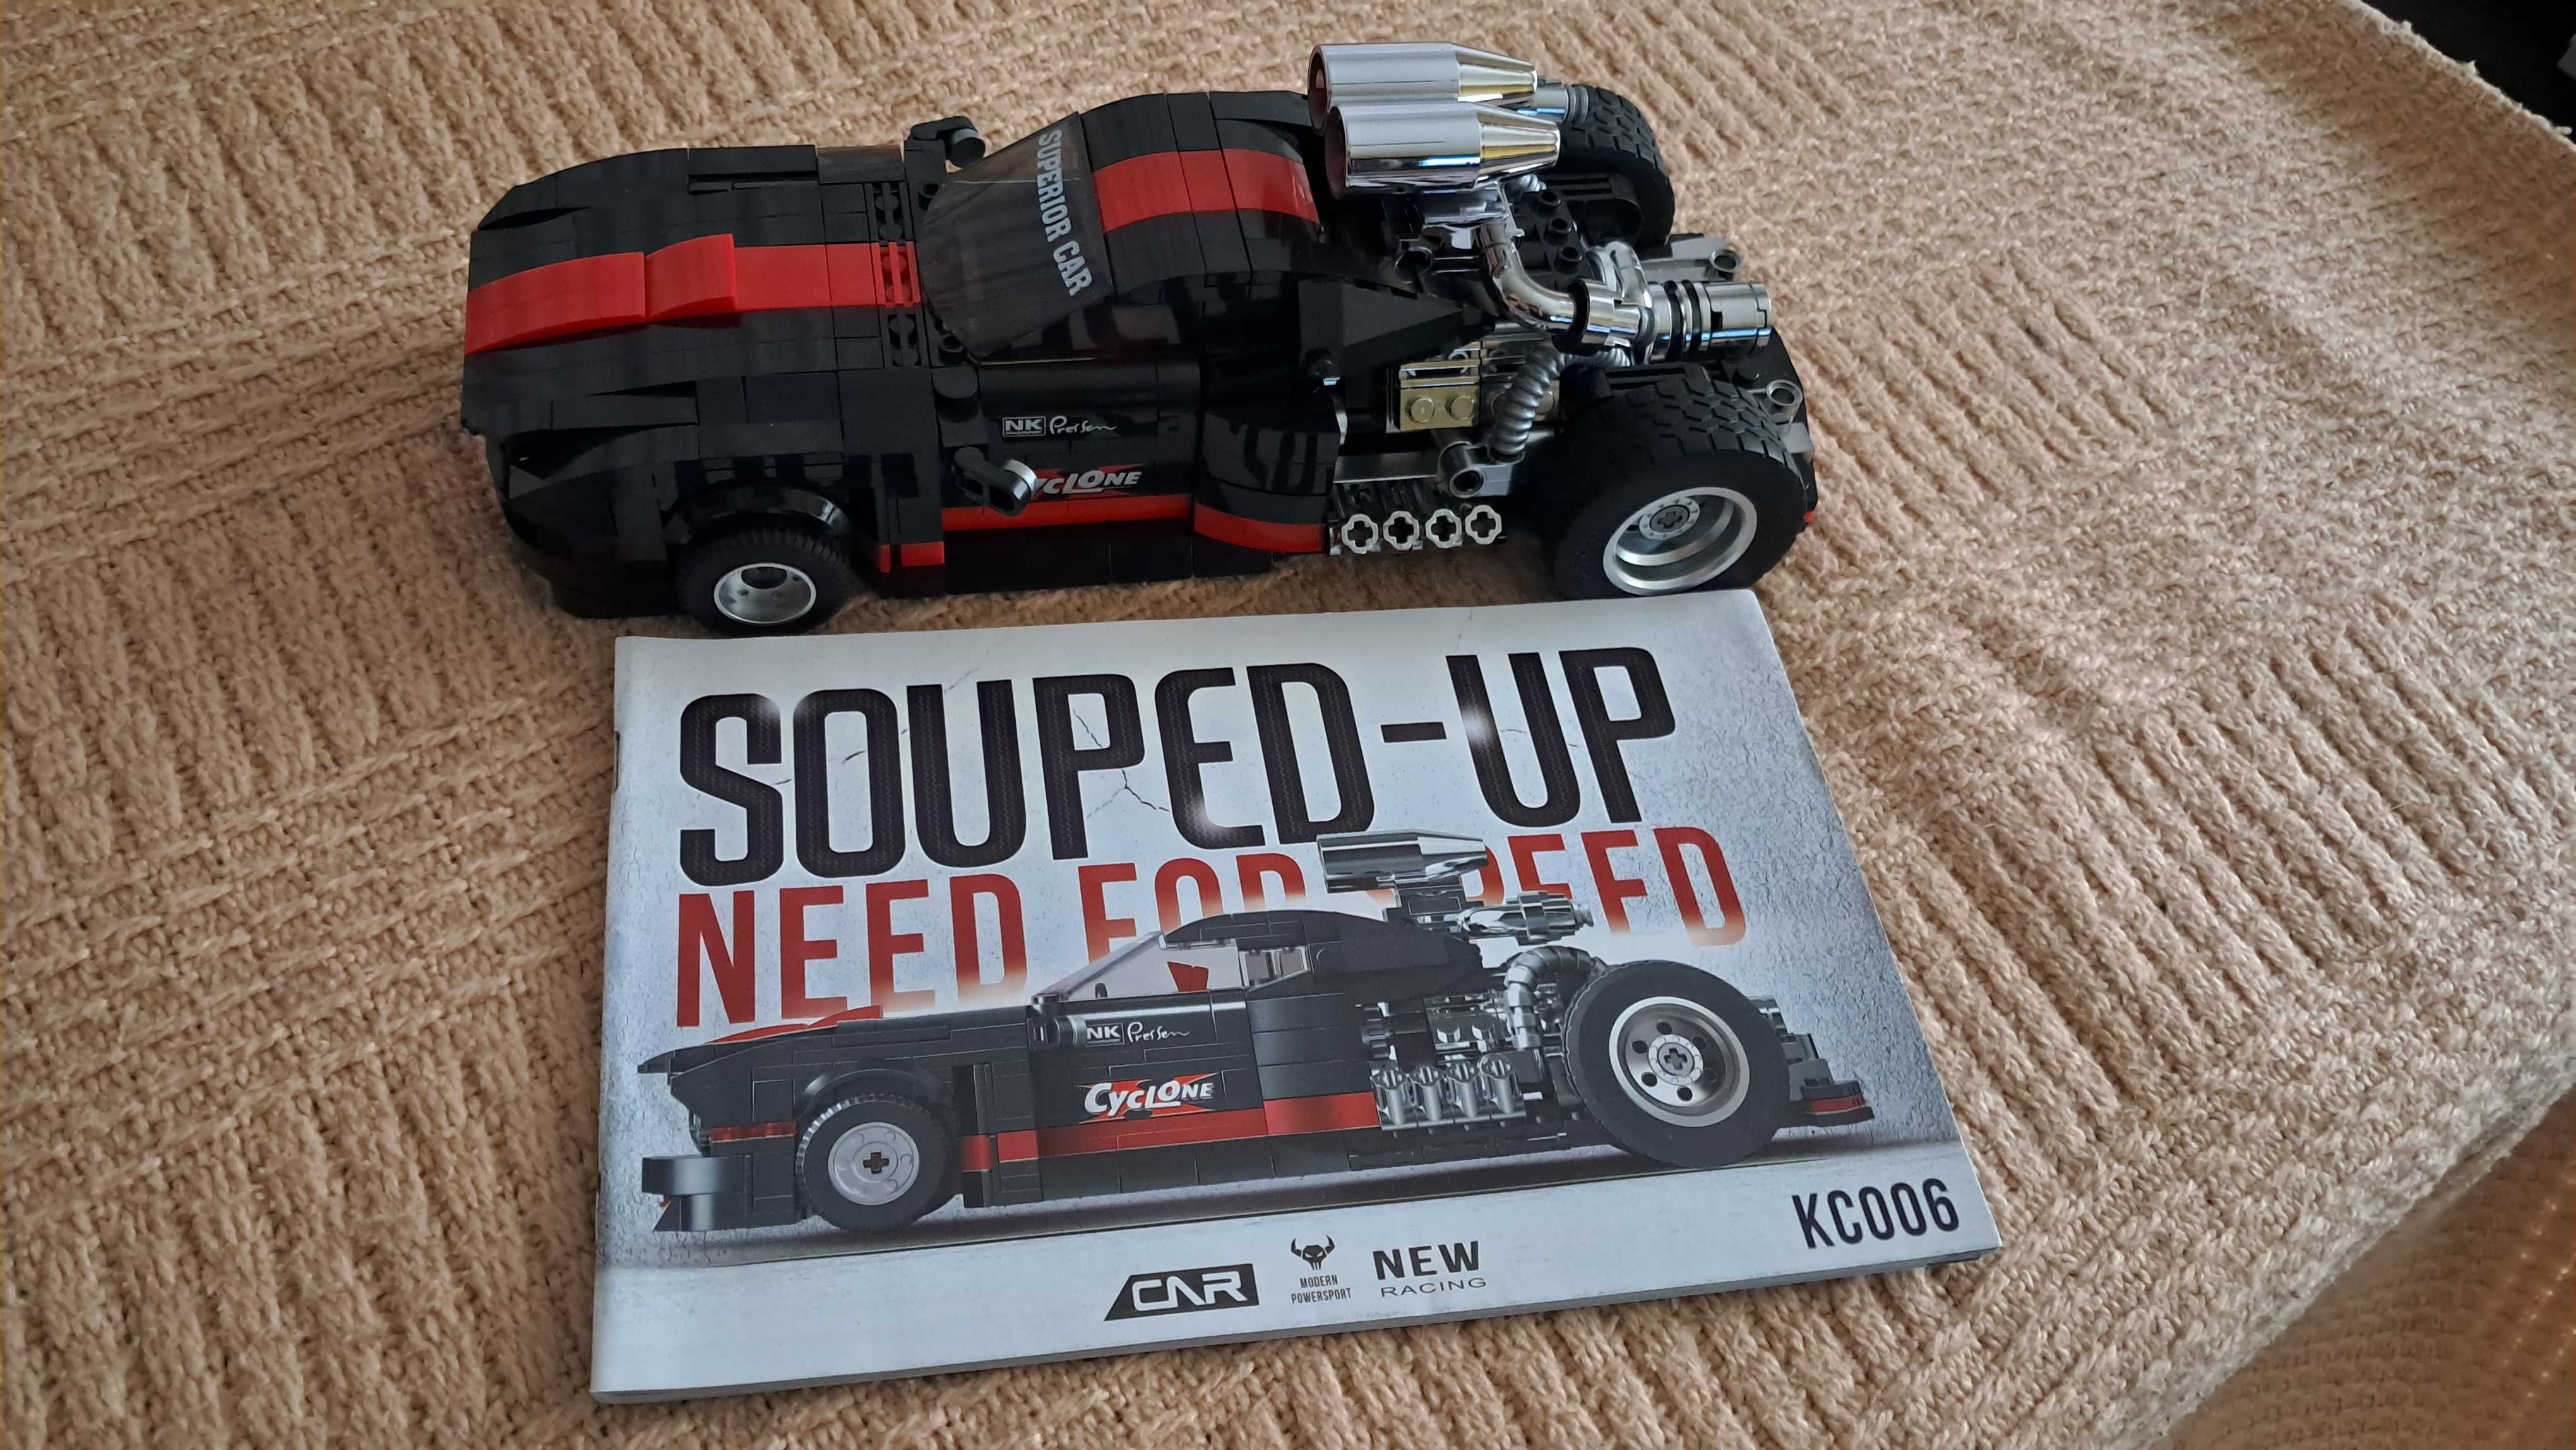 To nie Lego Ford Mustang decool Souped-up kc006